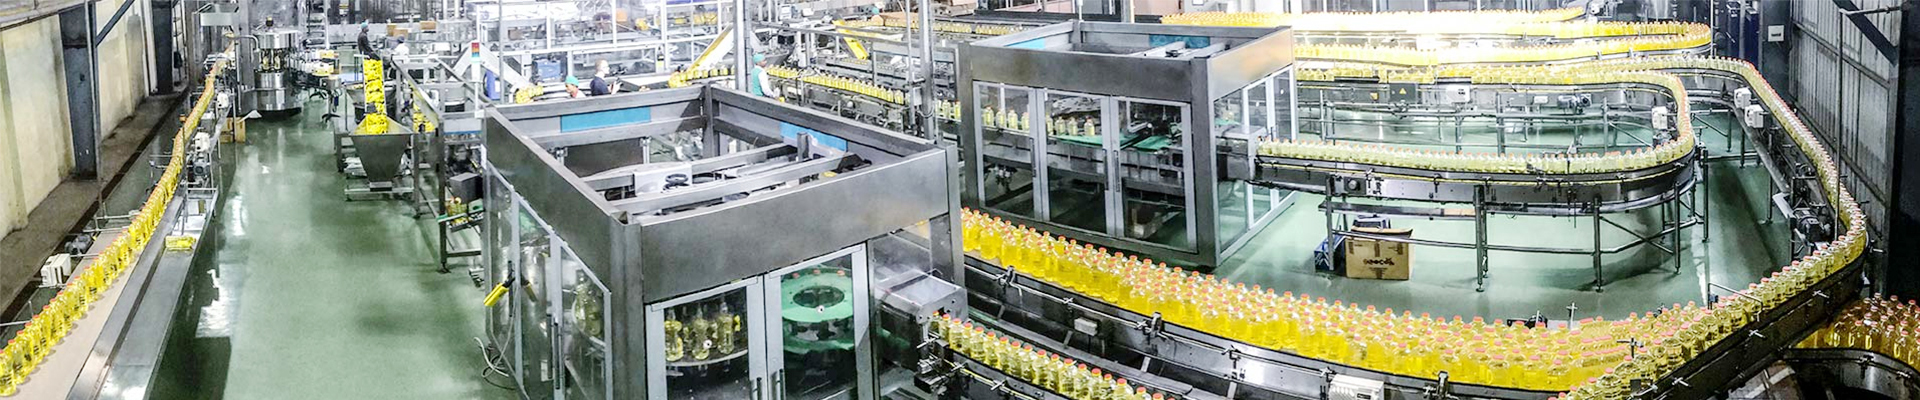 Small bottle water production line